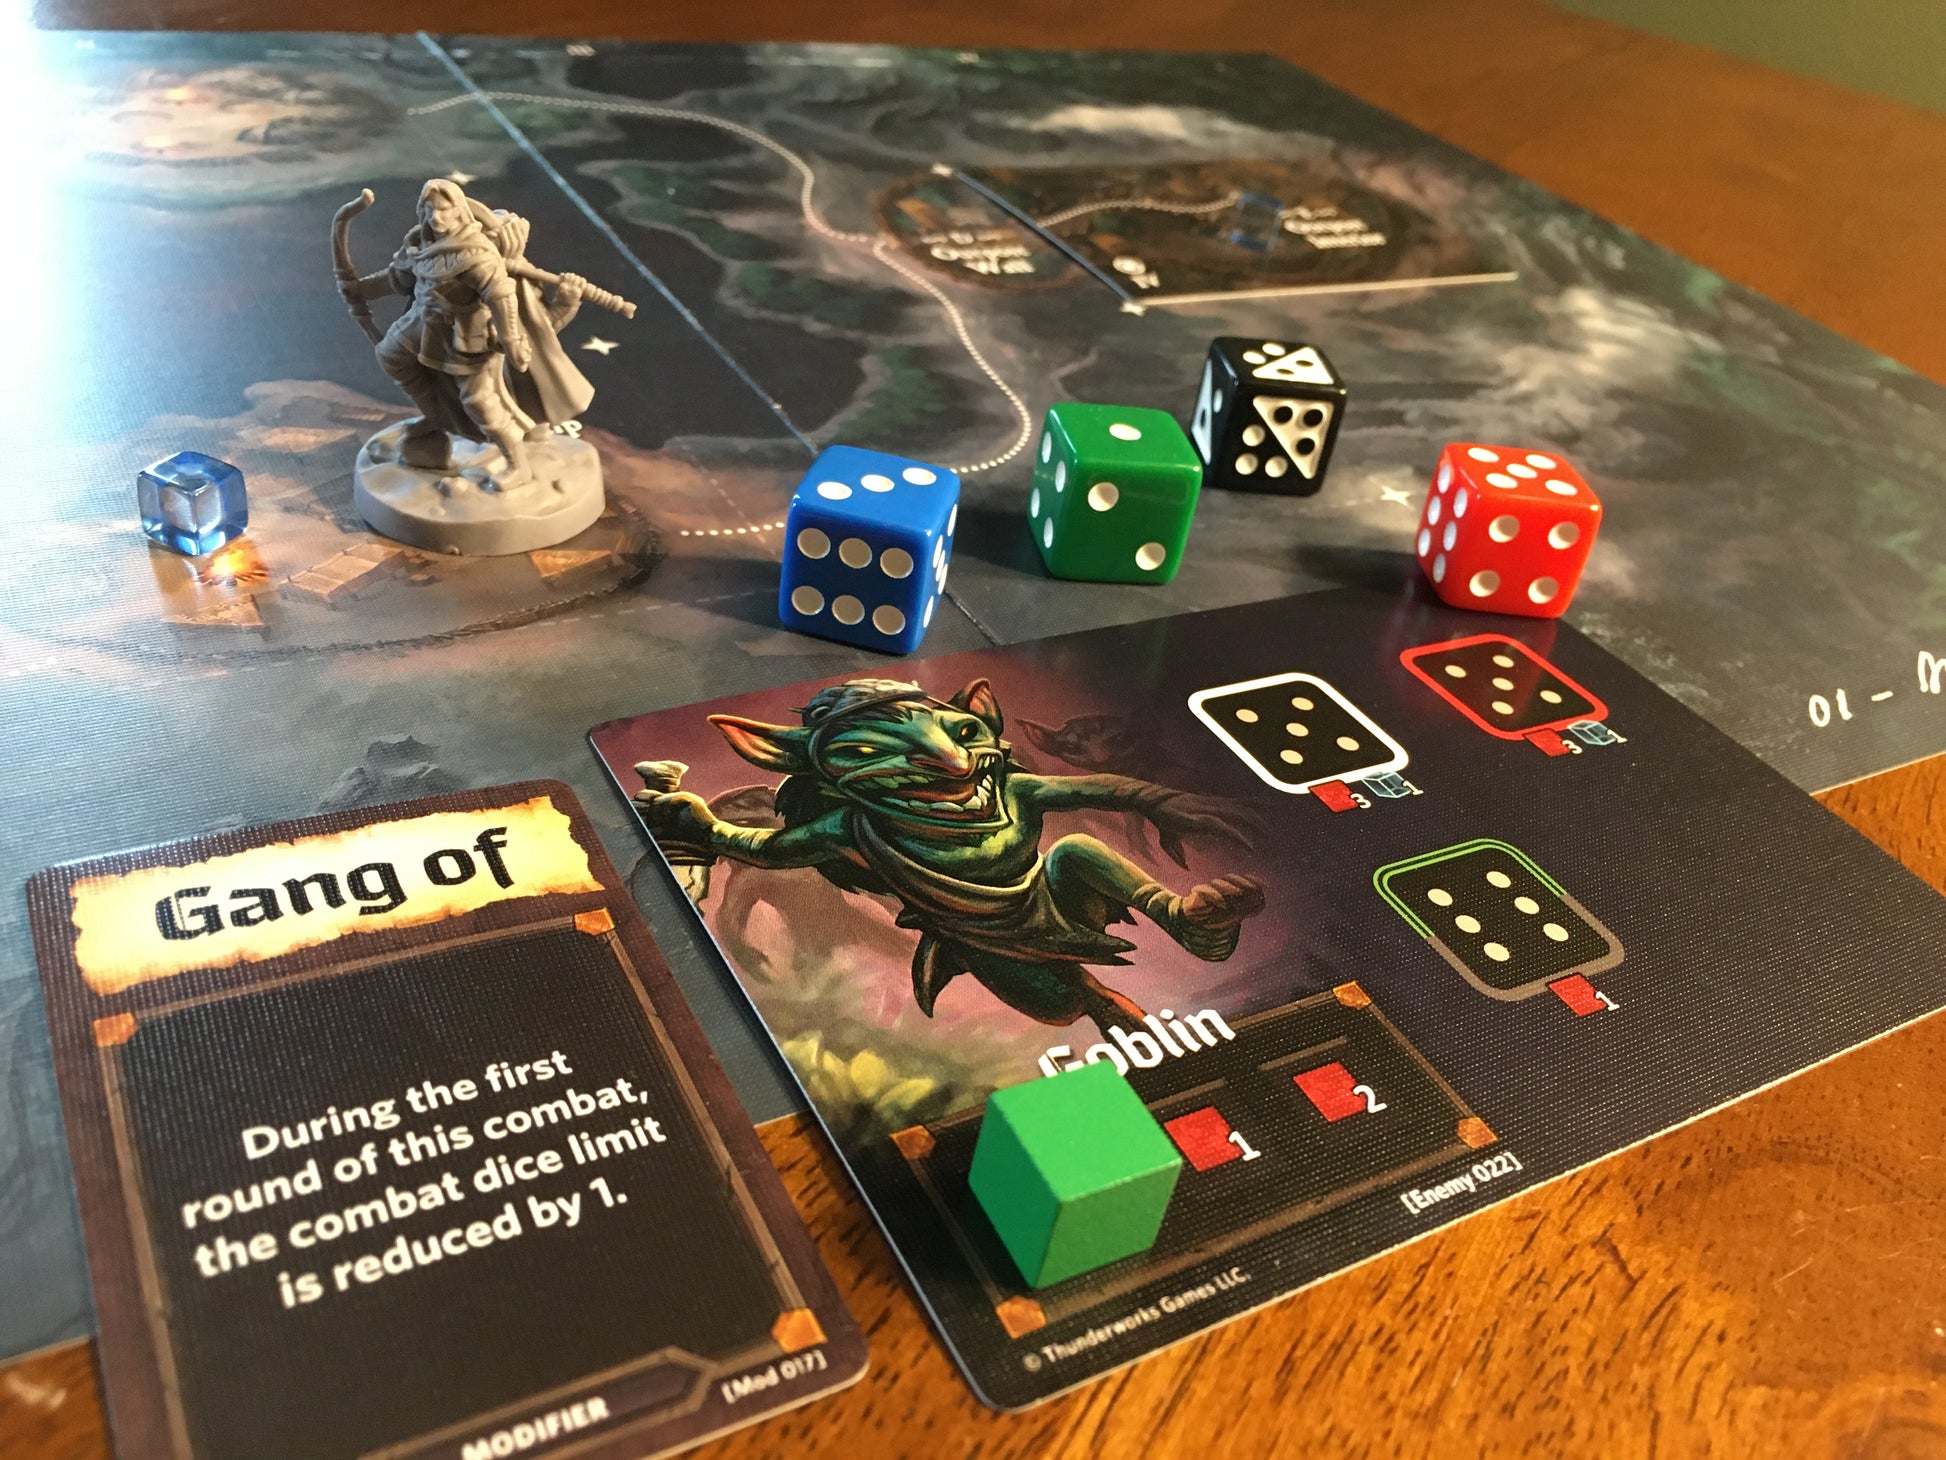  Thunderworks Games: Roll Player Board Game